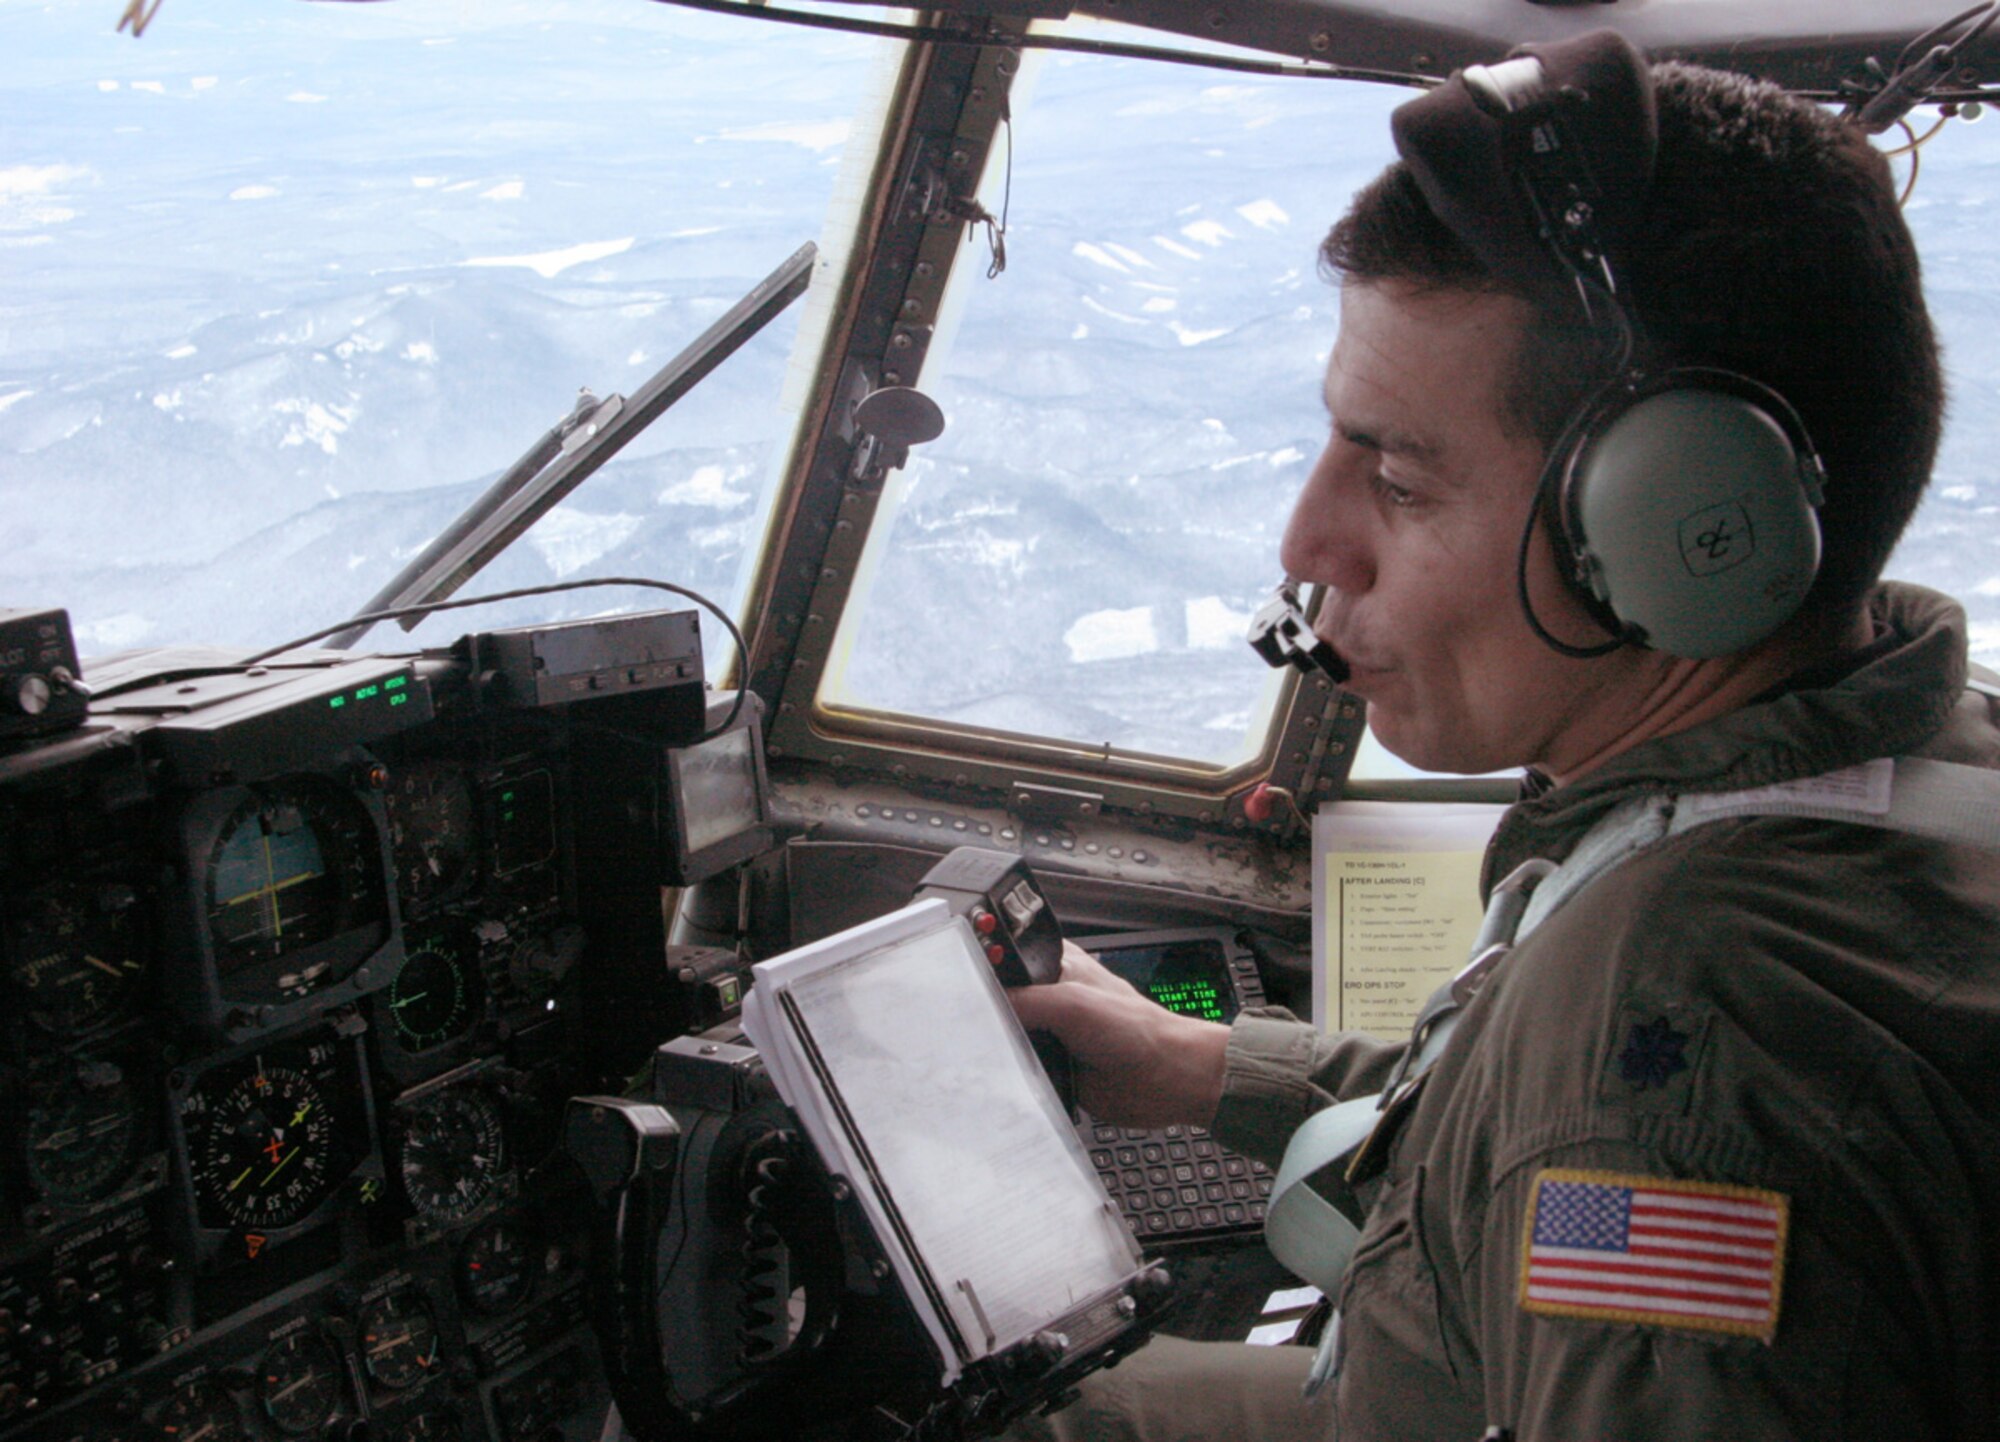 Lt. Col. Caesar Garduno receives coordinates while flying over Mt. Hood, Ore., Dec. 16. Colonel Garduno and his Air National Guard crew were joined by an Air Force Reserve pararescueman searching for three missing climbers. The colonel is a C-130 pilot from the 152nd Airlift Wing in Nevada. (U.S. Air Force photo/Maj. James R. Wilson)